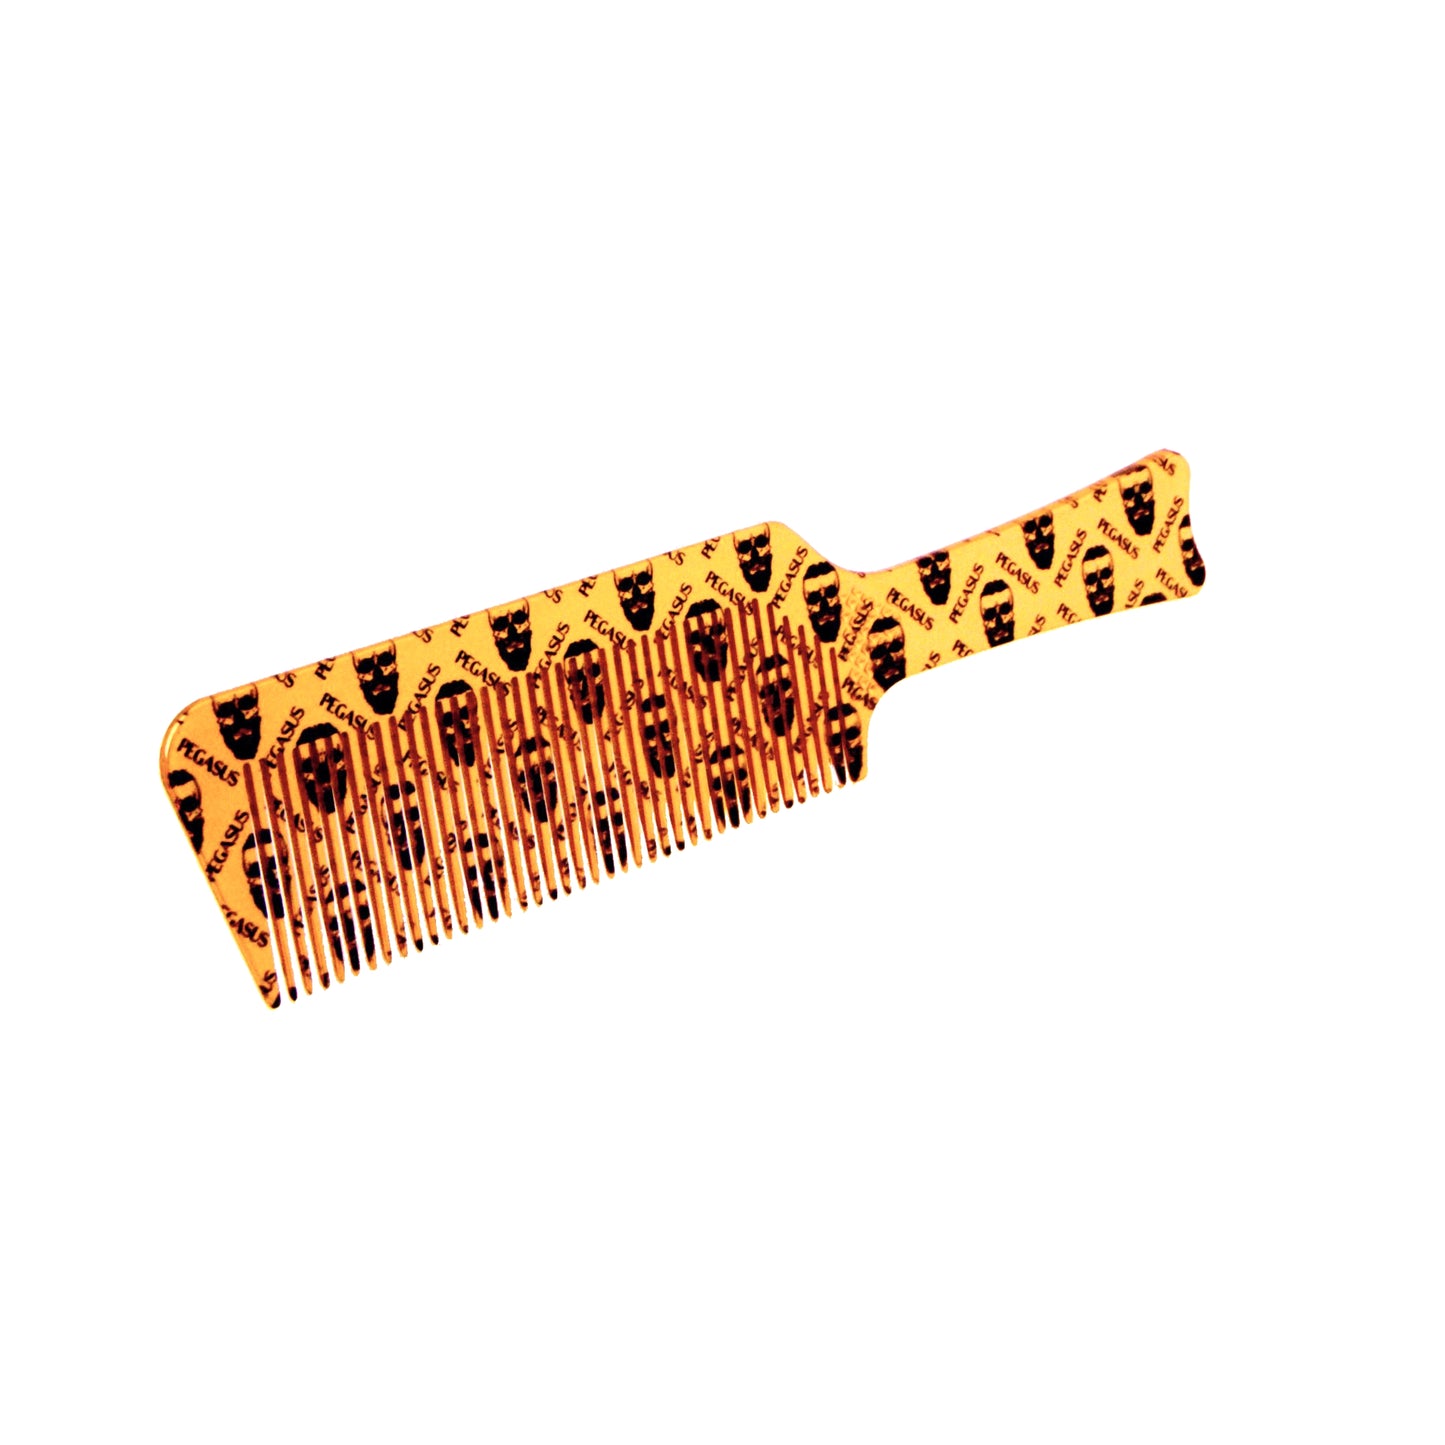 Pegasus Skulleto 514A, 8.75in Hard Rubber Fine Tooth Flattop Butch Comb, Handmade, Seamless, Smooth Edges, Anti Static, Heat and Chemically Resistant Comb | Peines de goma dura - Gold